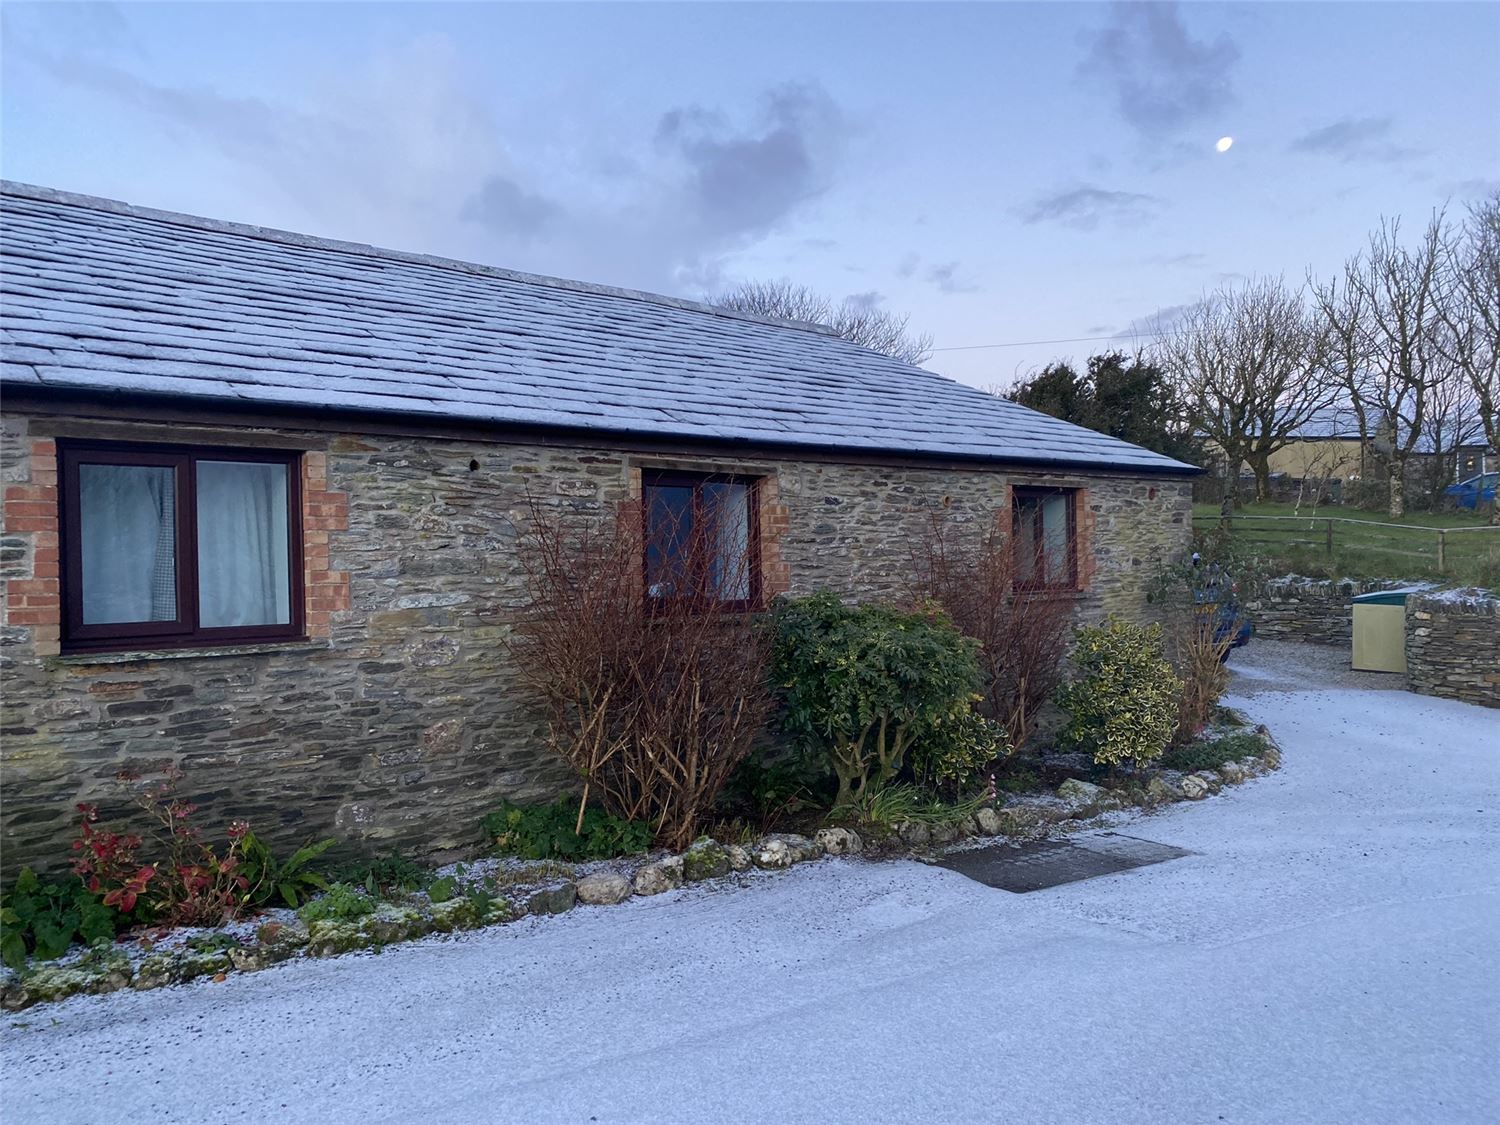 Snowy scenes at sea view Polrunny Farm holiday cottages Boscastle Cornwall